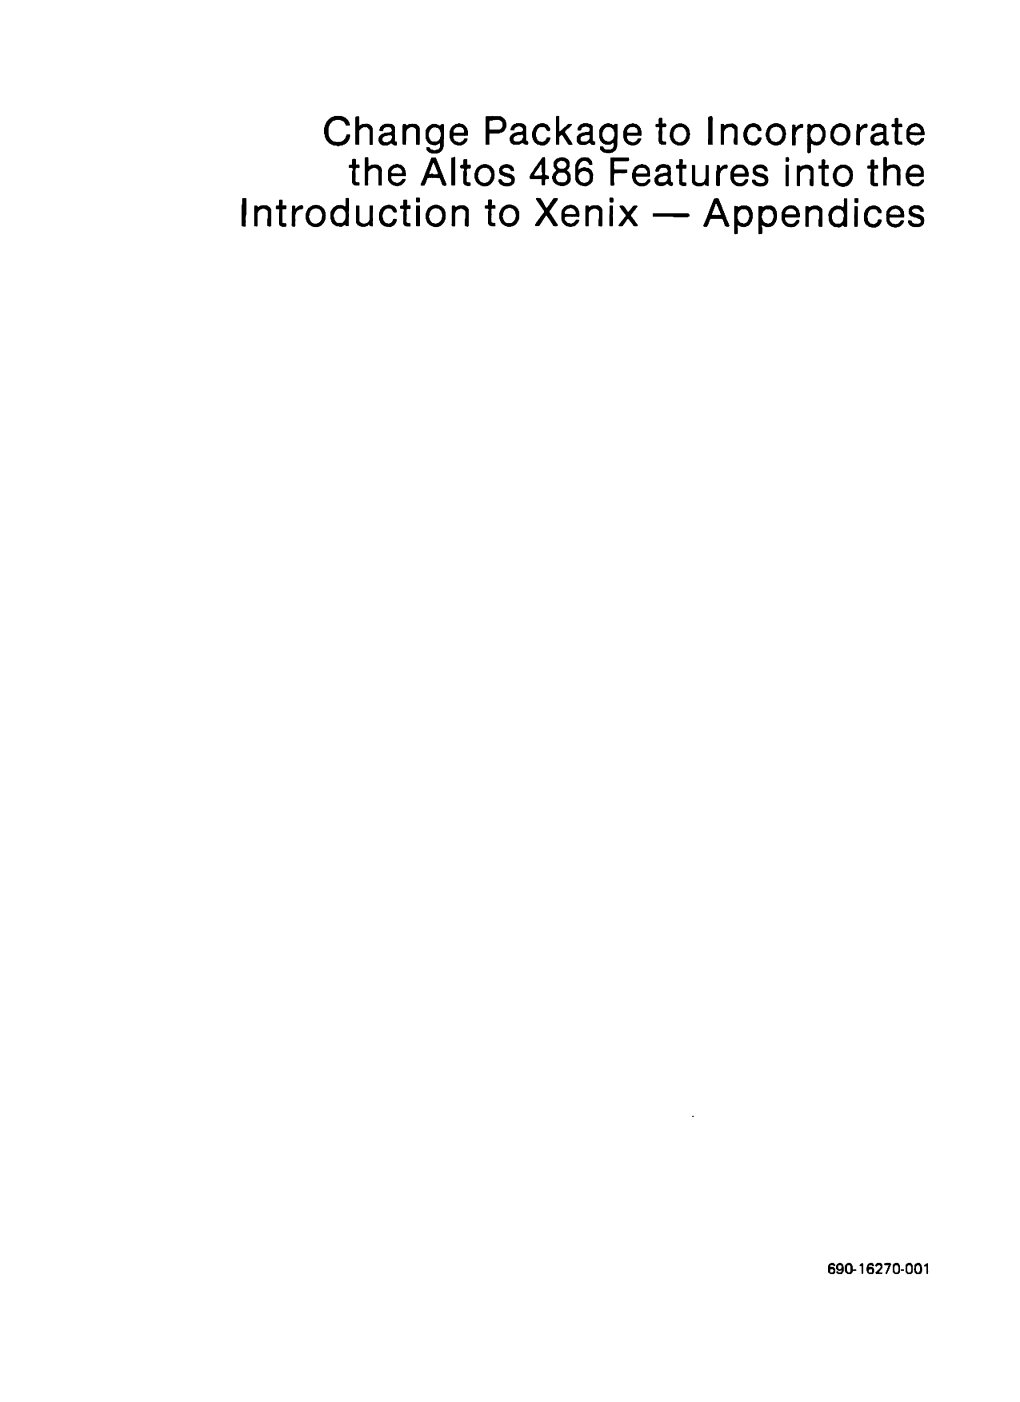 Change Package to Incorporate the Altos 486 Features Into the Introduction to Xenix - Appendices